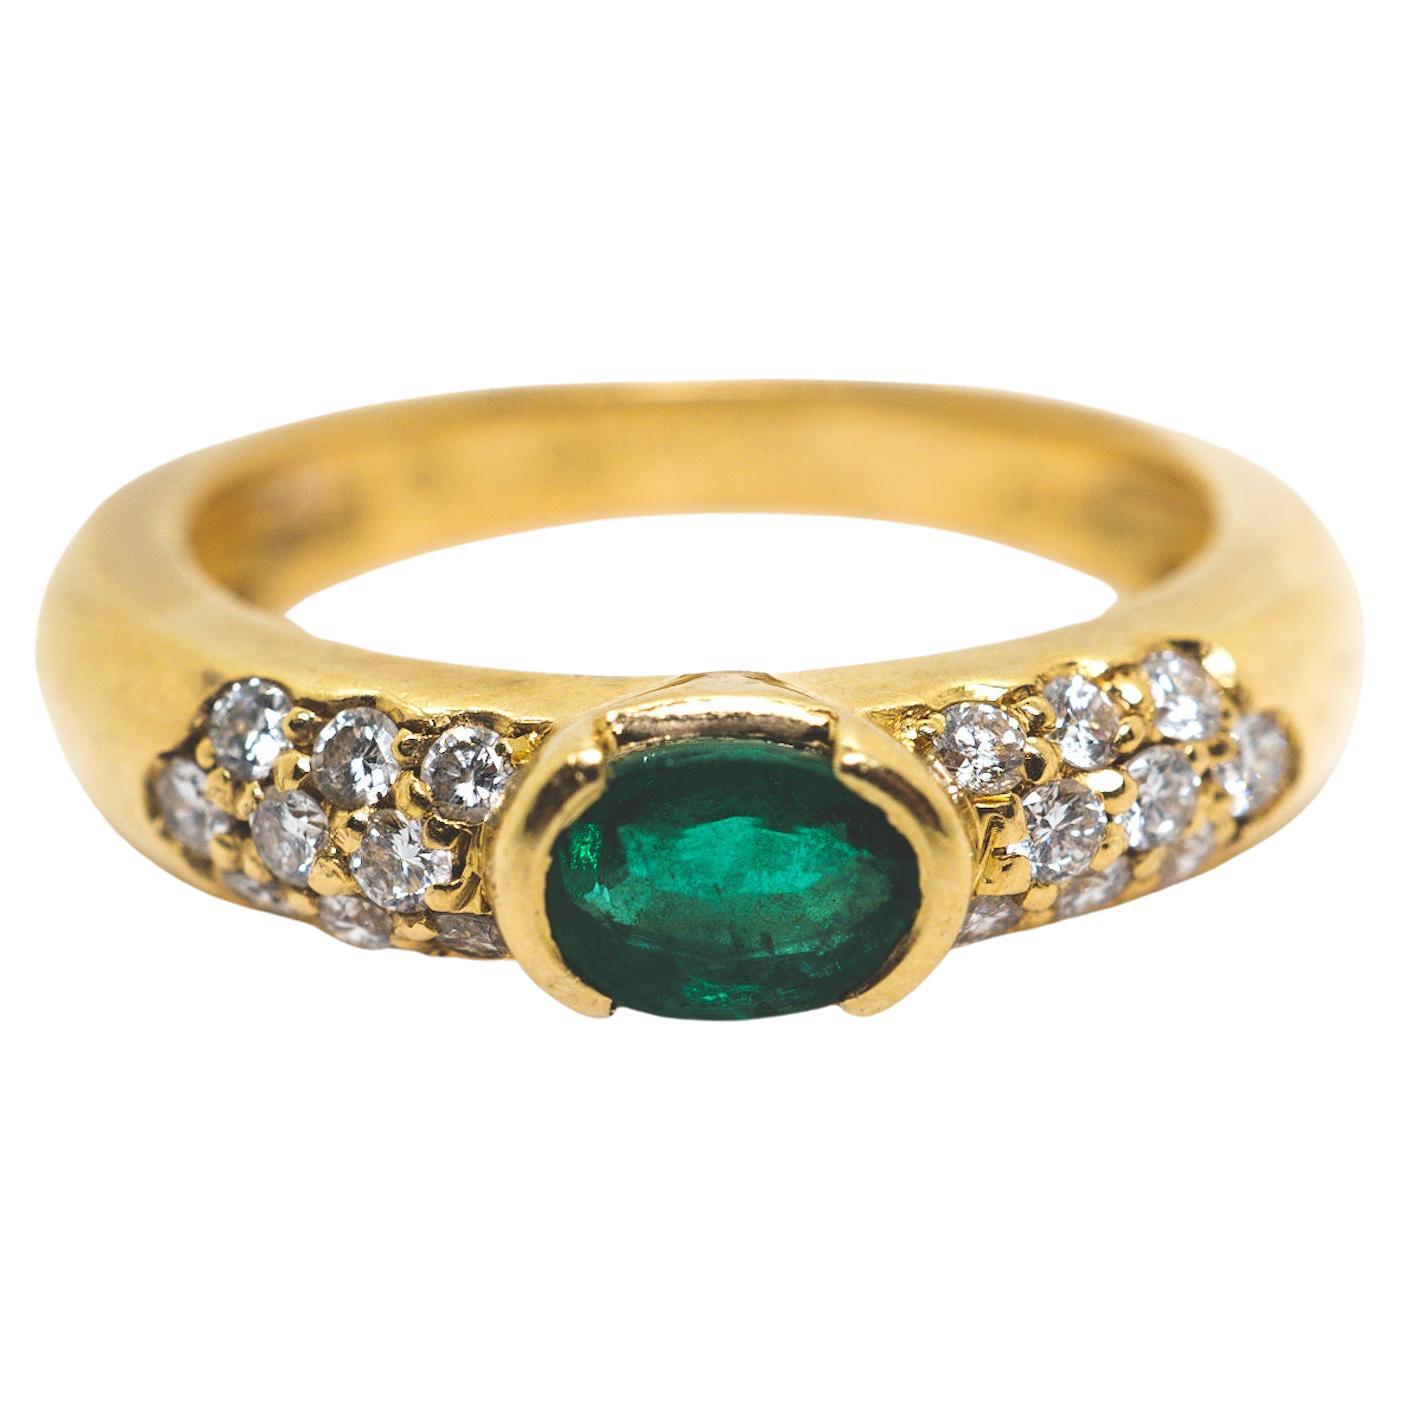 Piaget Emerald and Diamond Ring